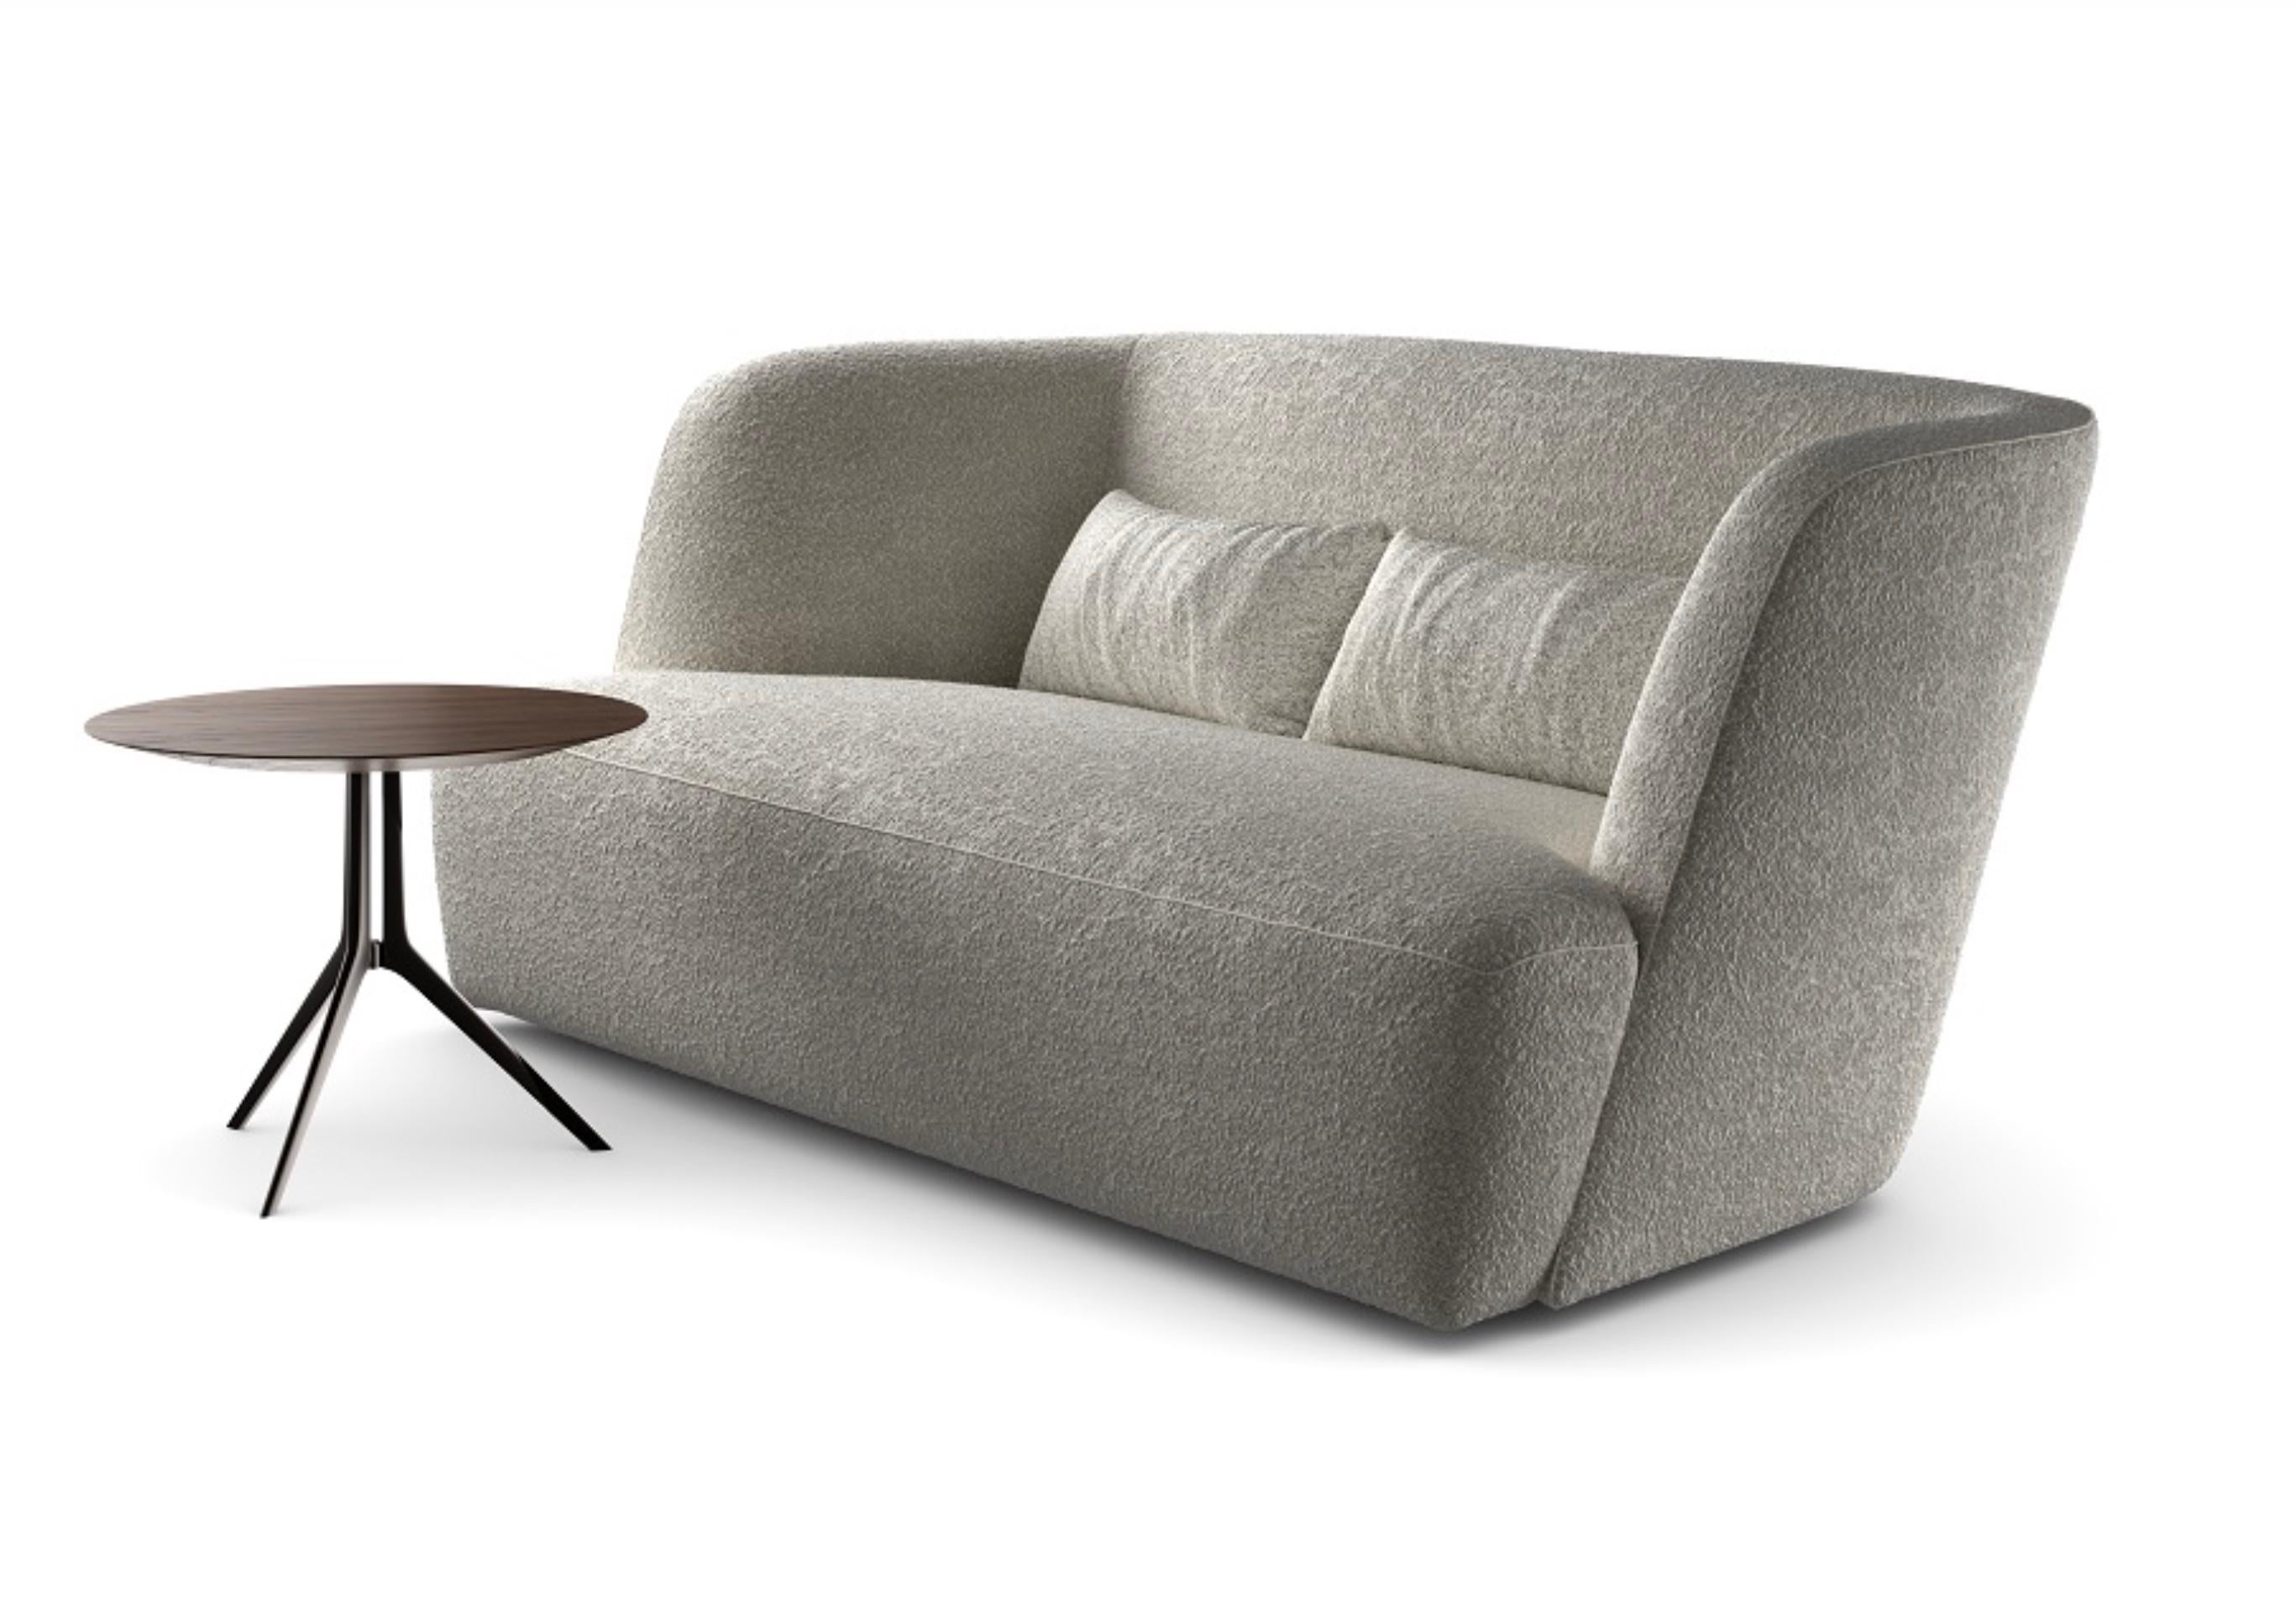 Organic Modern Lievore + Altherr Désile Park 'Davos' Sofa 235 for Verzelloni Italy For Sale